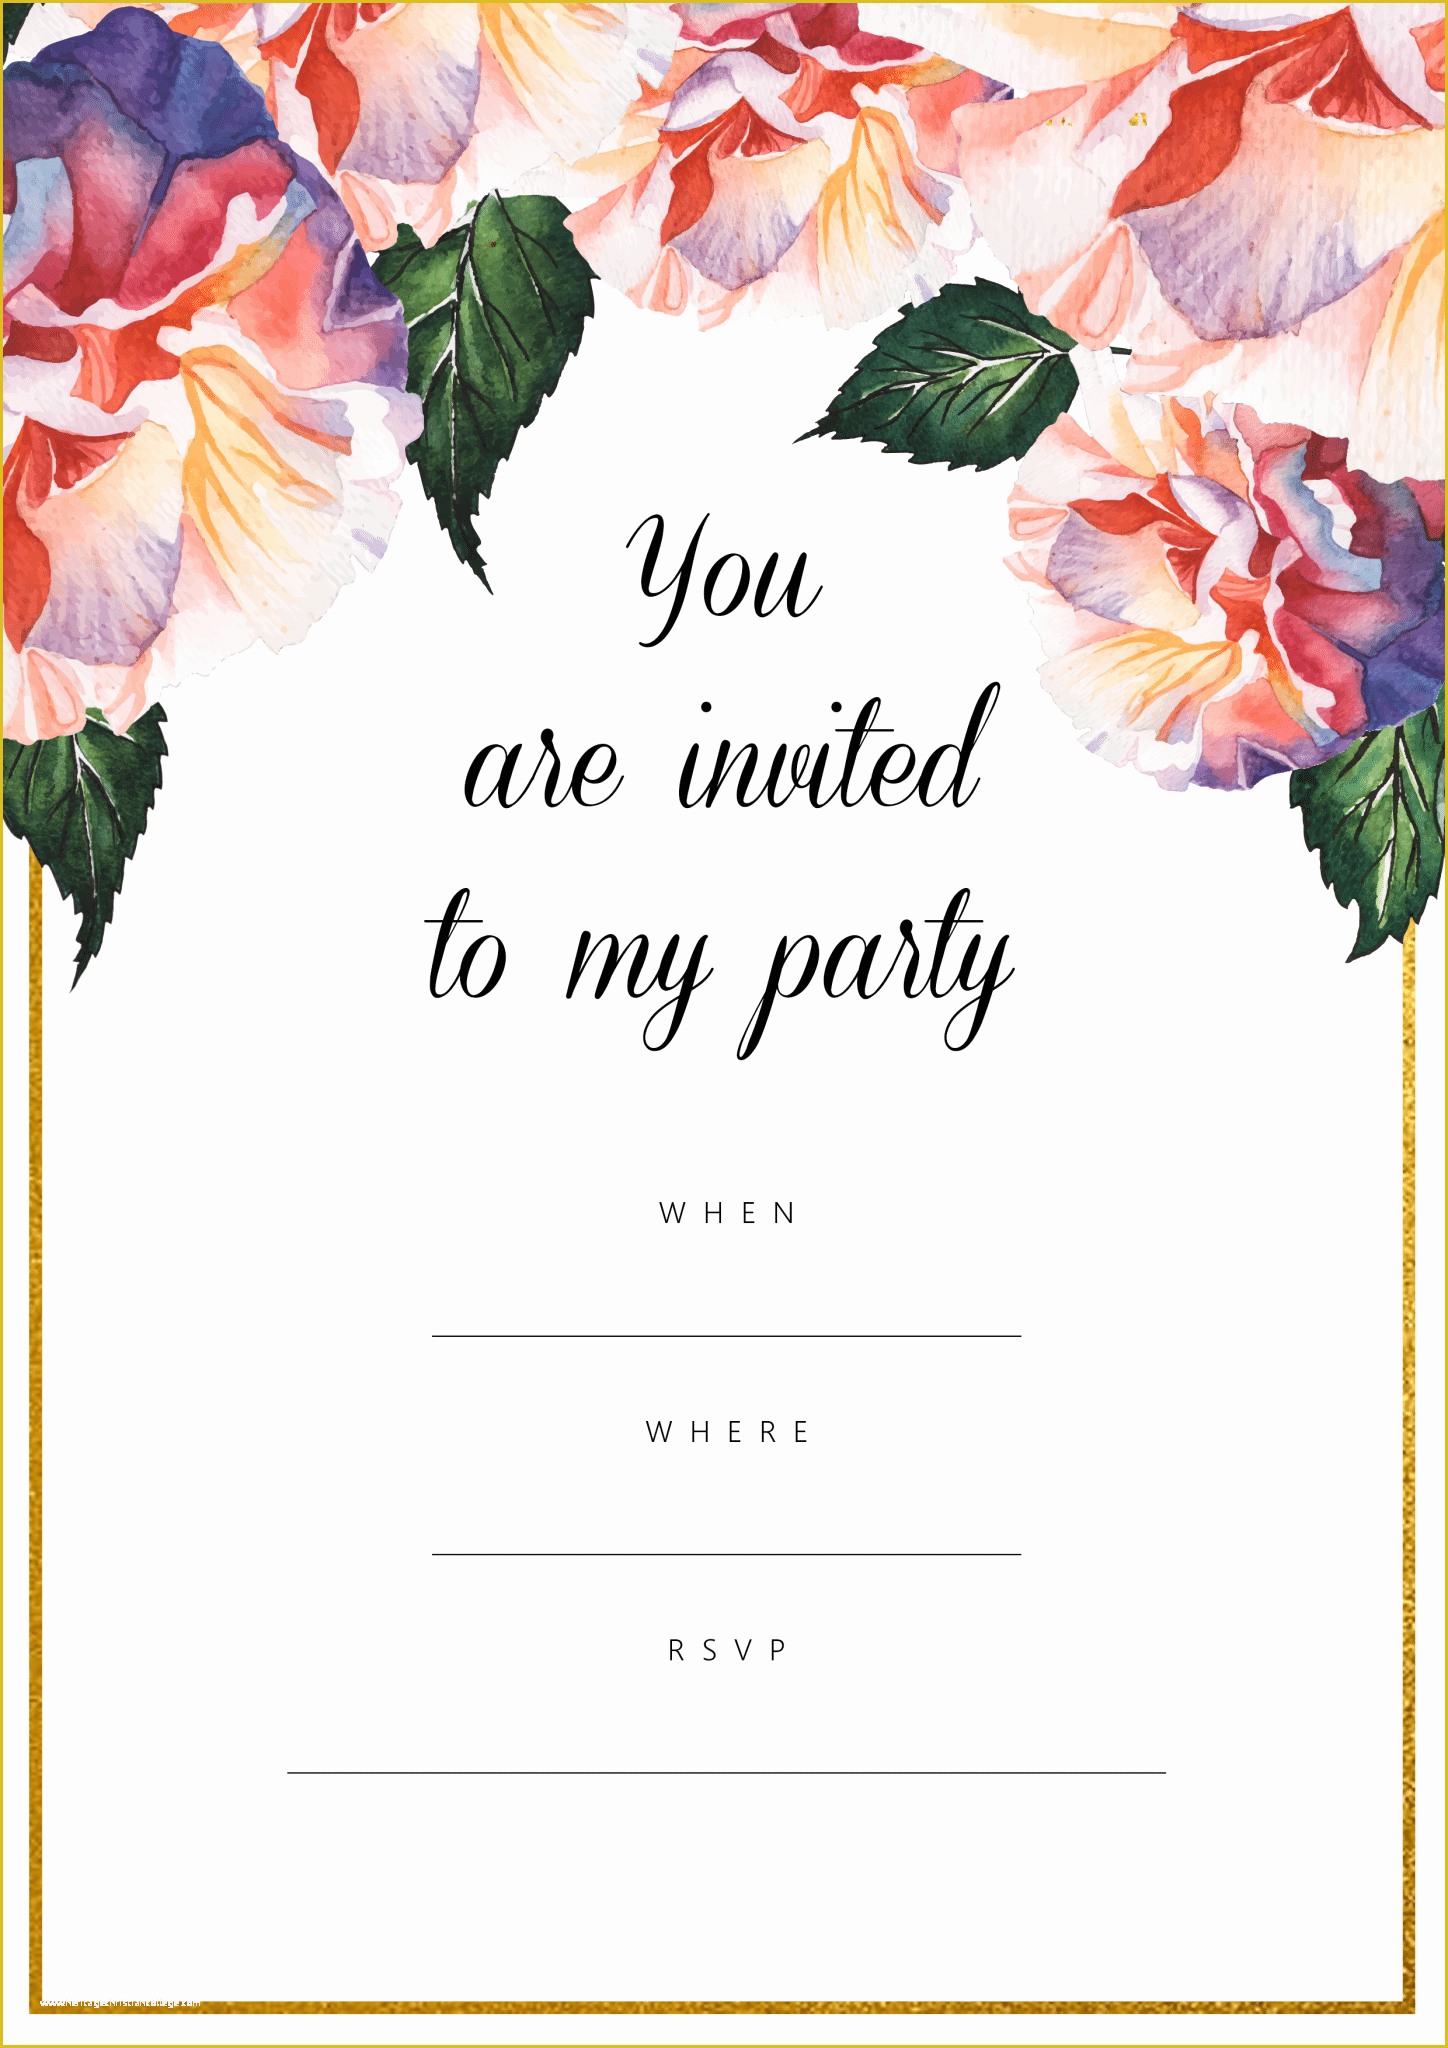 free-online-invitation-templates-of-free-party-invitations-all-free